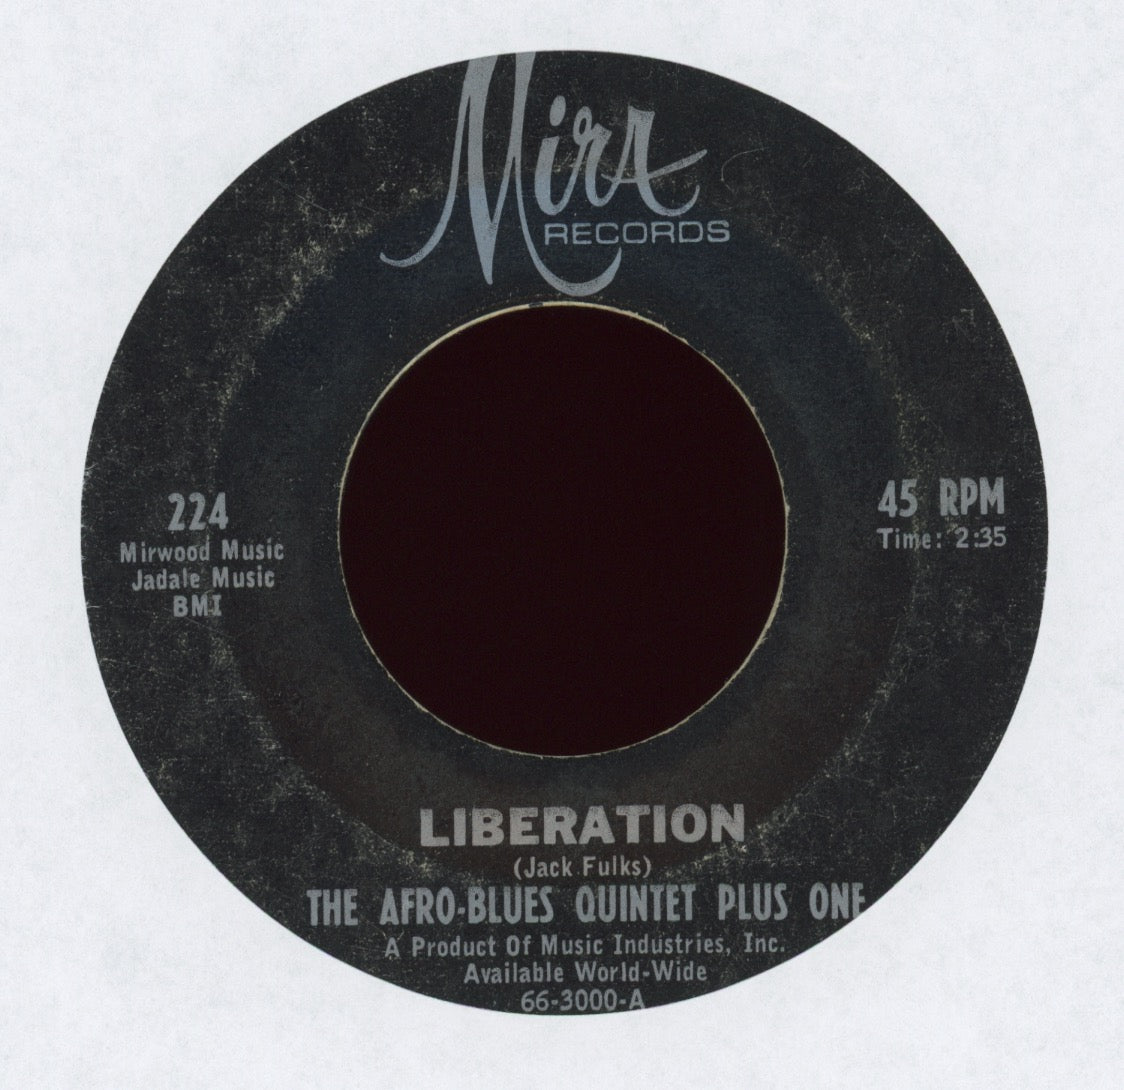 The Afro Blues Quintet Plus One - Liberation on Mira